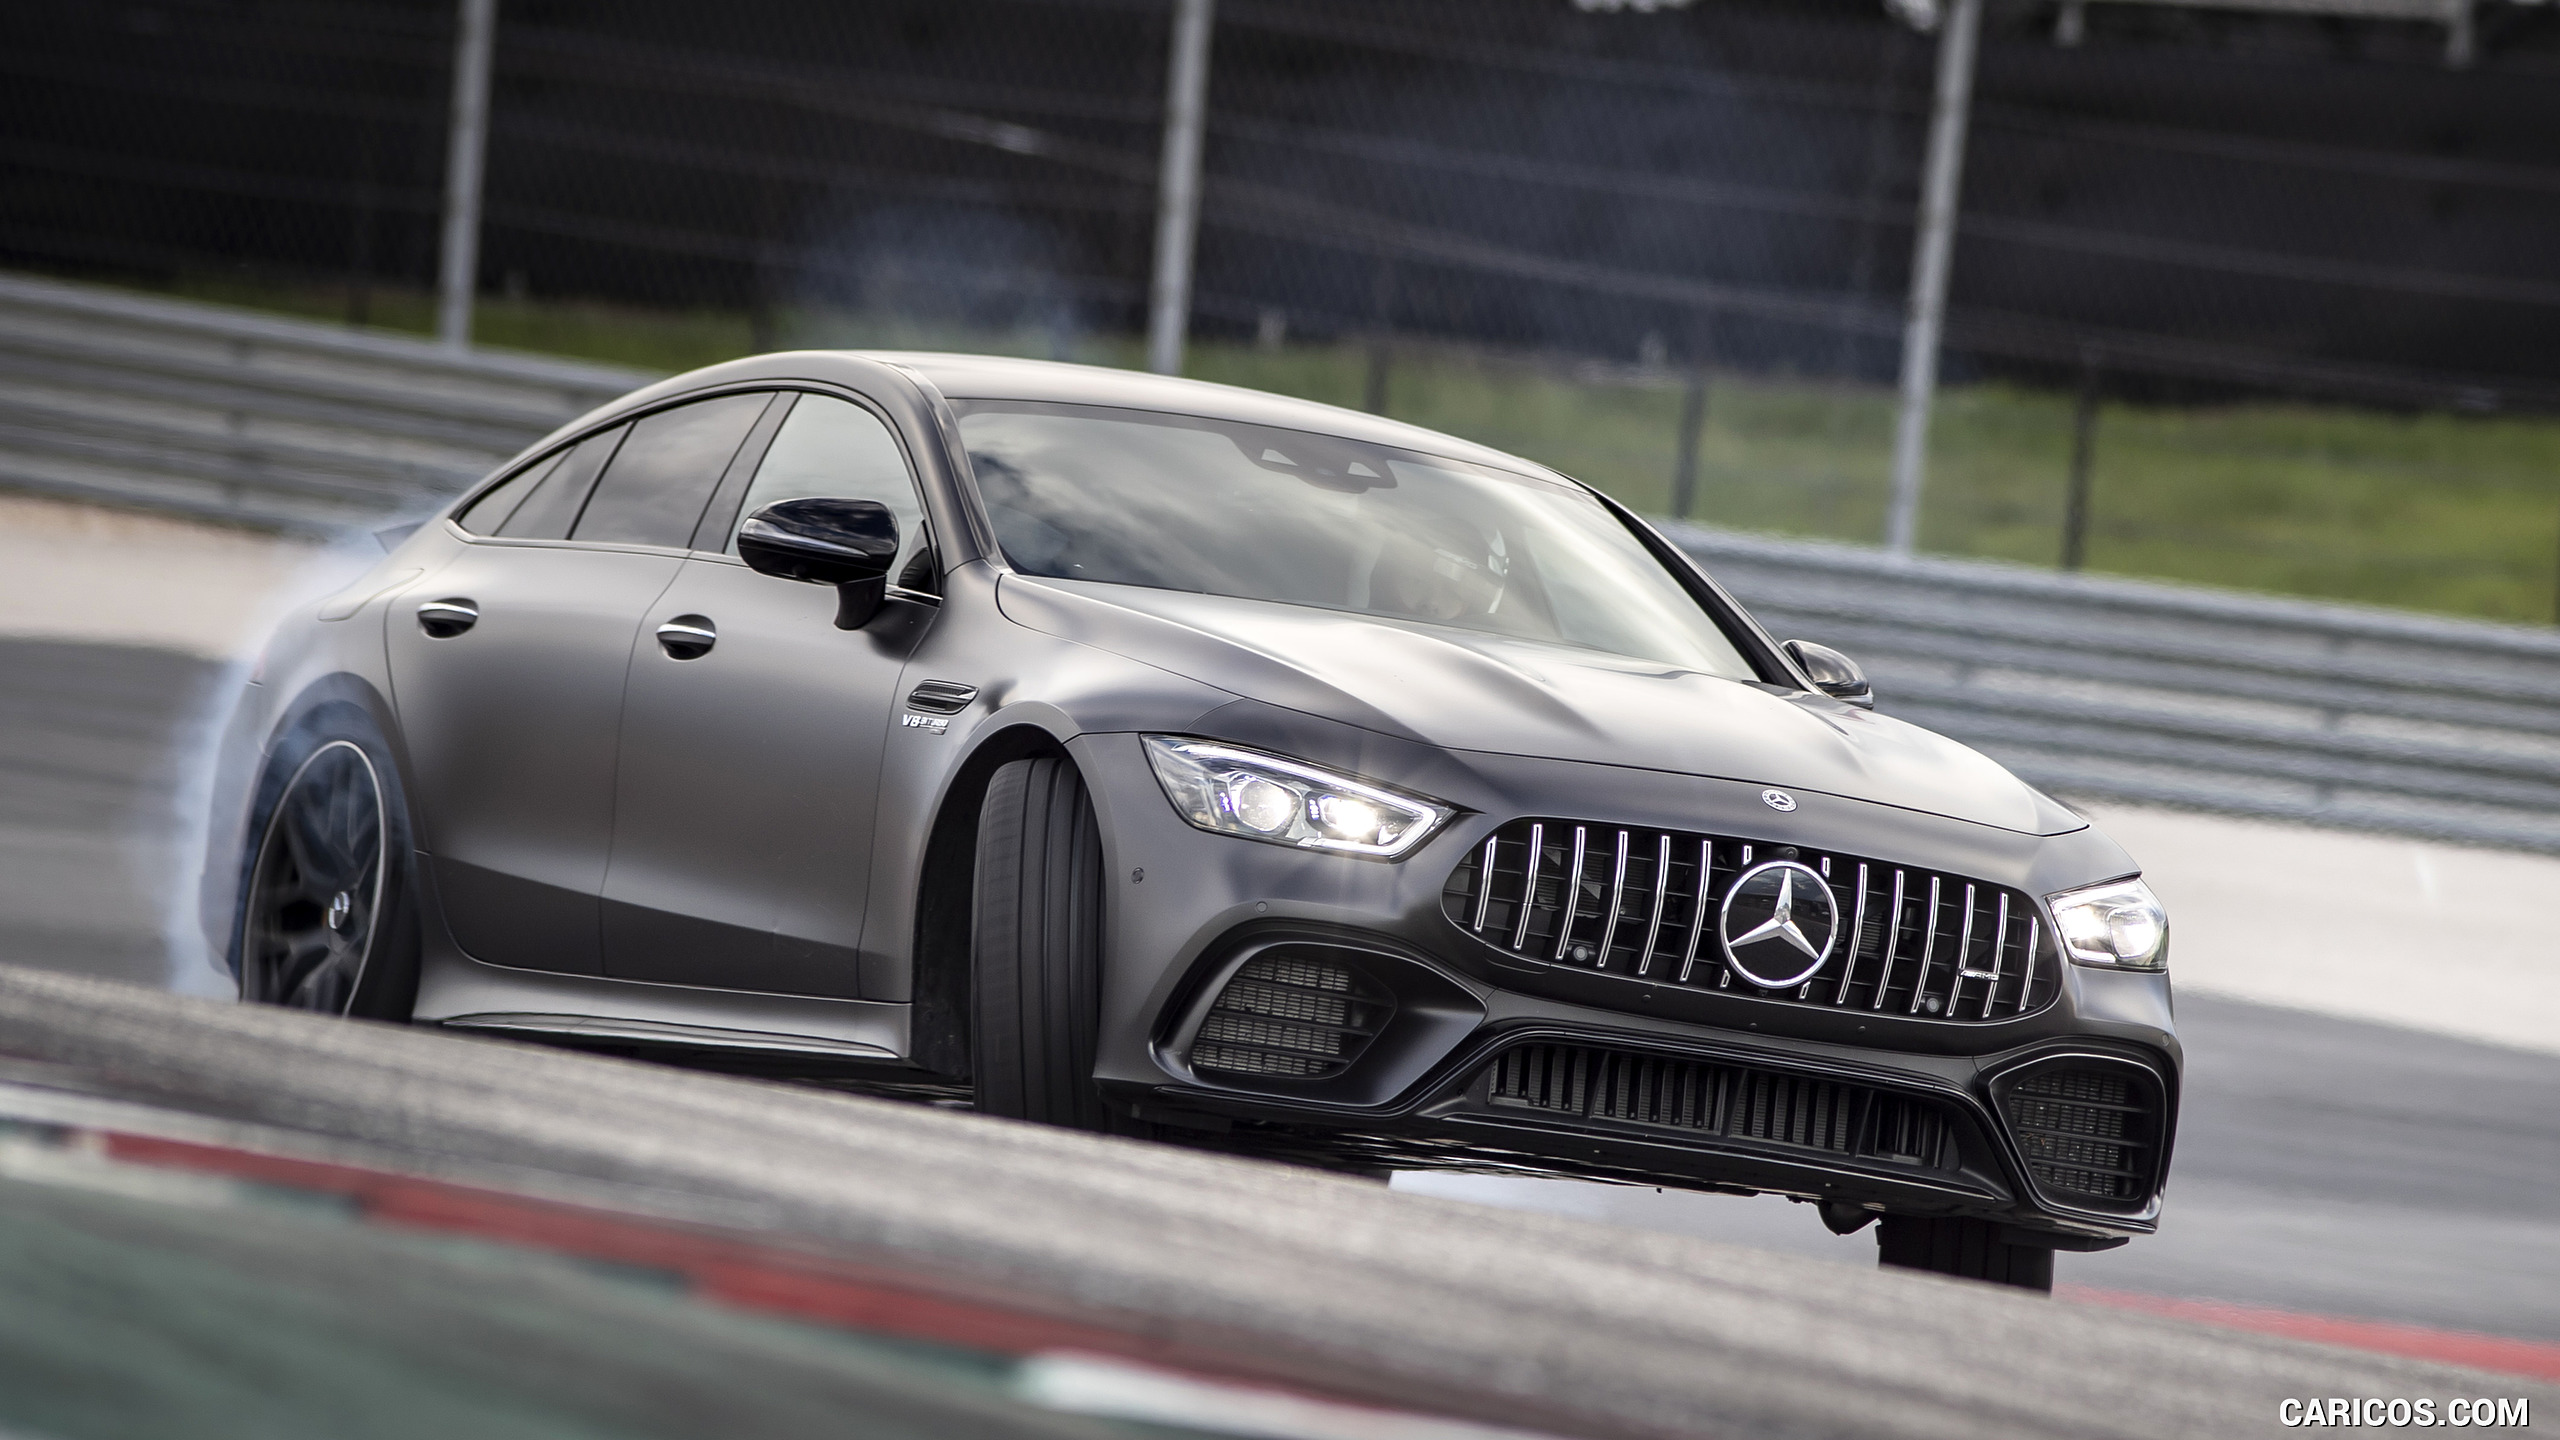 2019 Mercedes-AMG GT 63 S 4MATIC+ 4-Door Coupe - Front Three-Quarter, #183 of 427